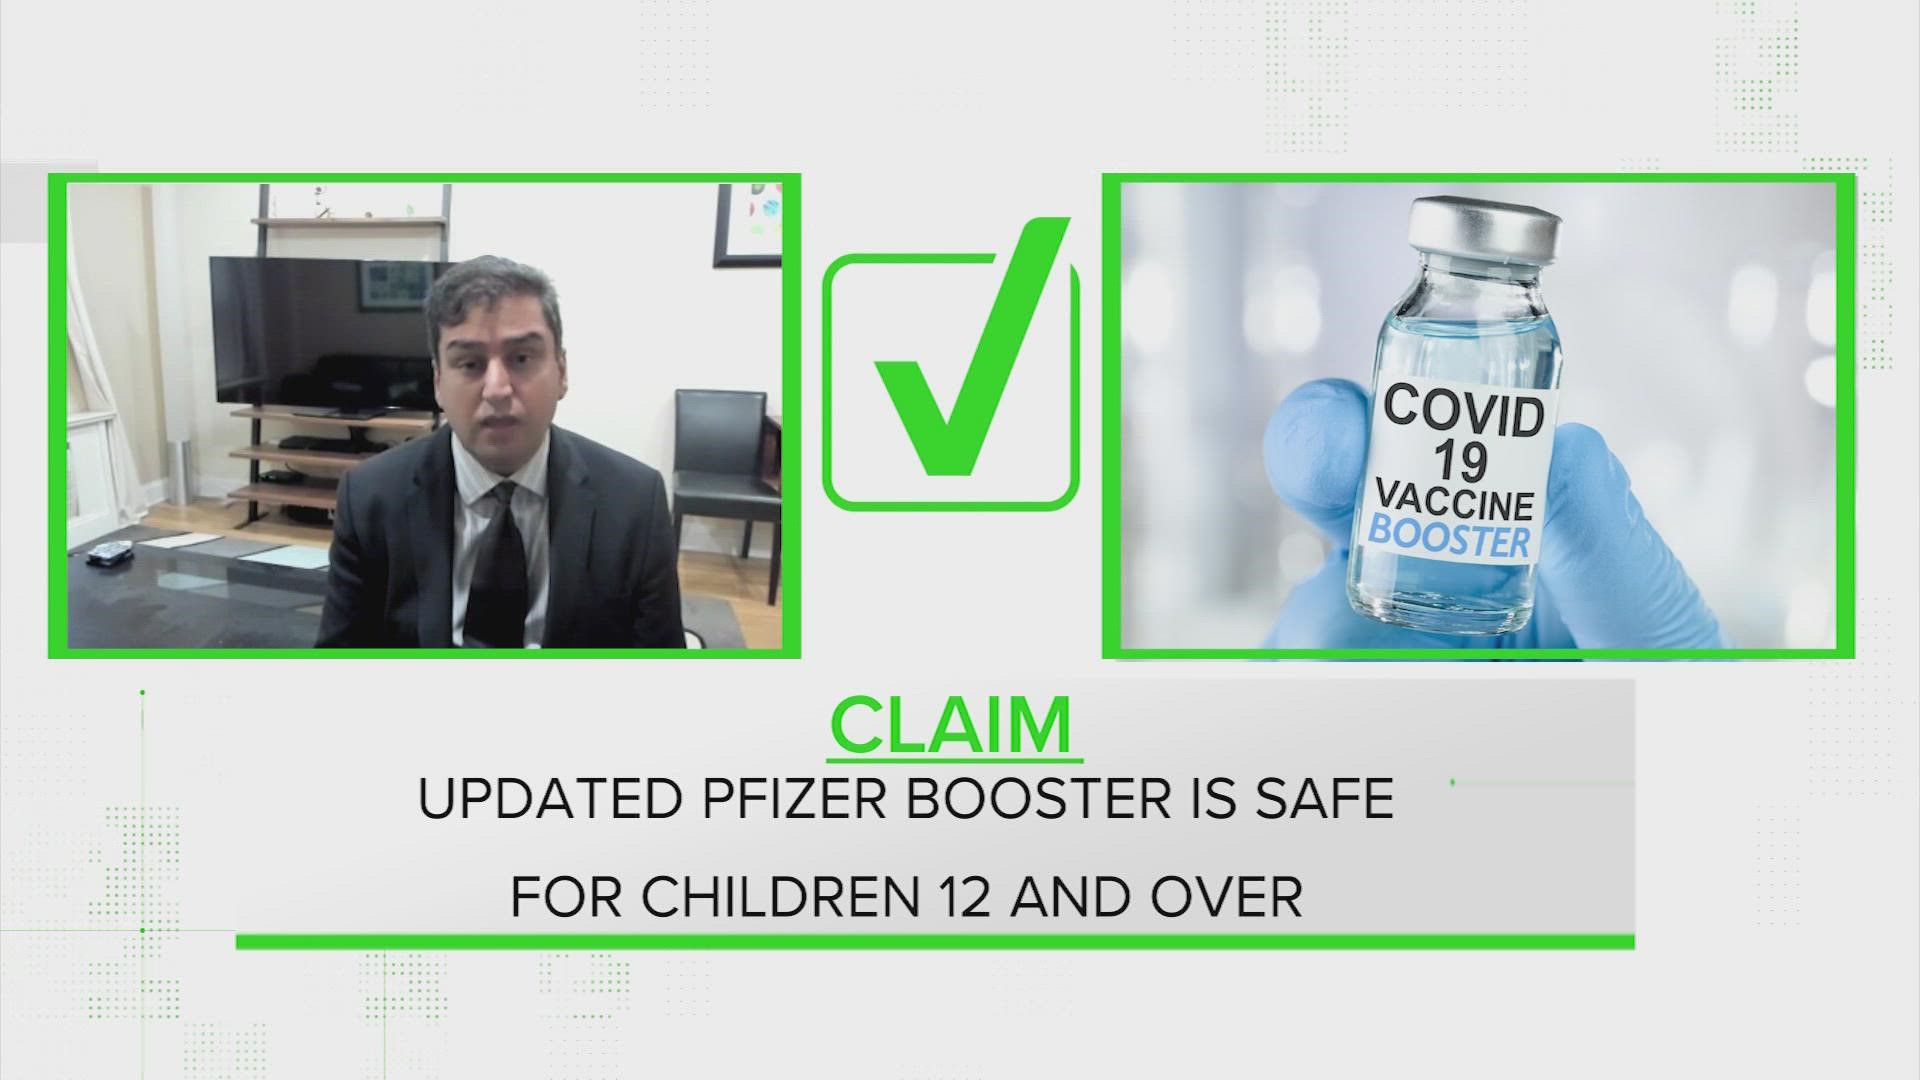 Our VERIFY team talked with a Johns Hopkins doctor to fact-check common concerns about the new COVID-19 booster.